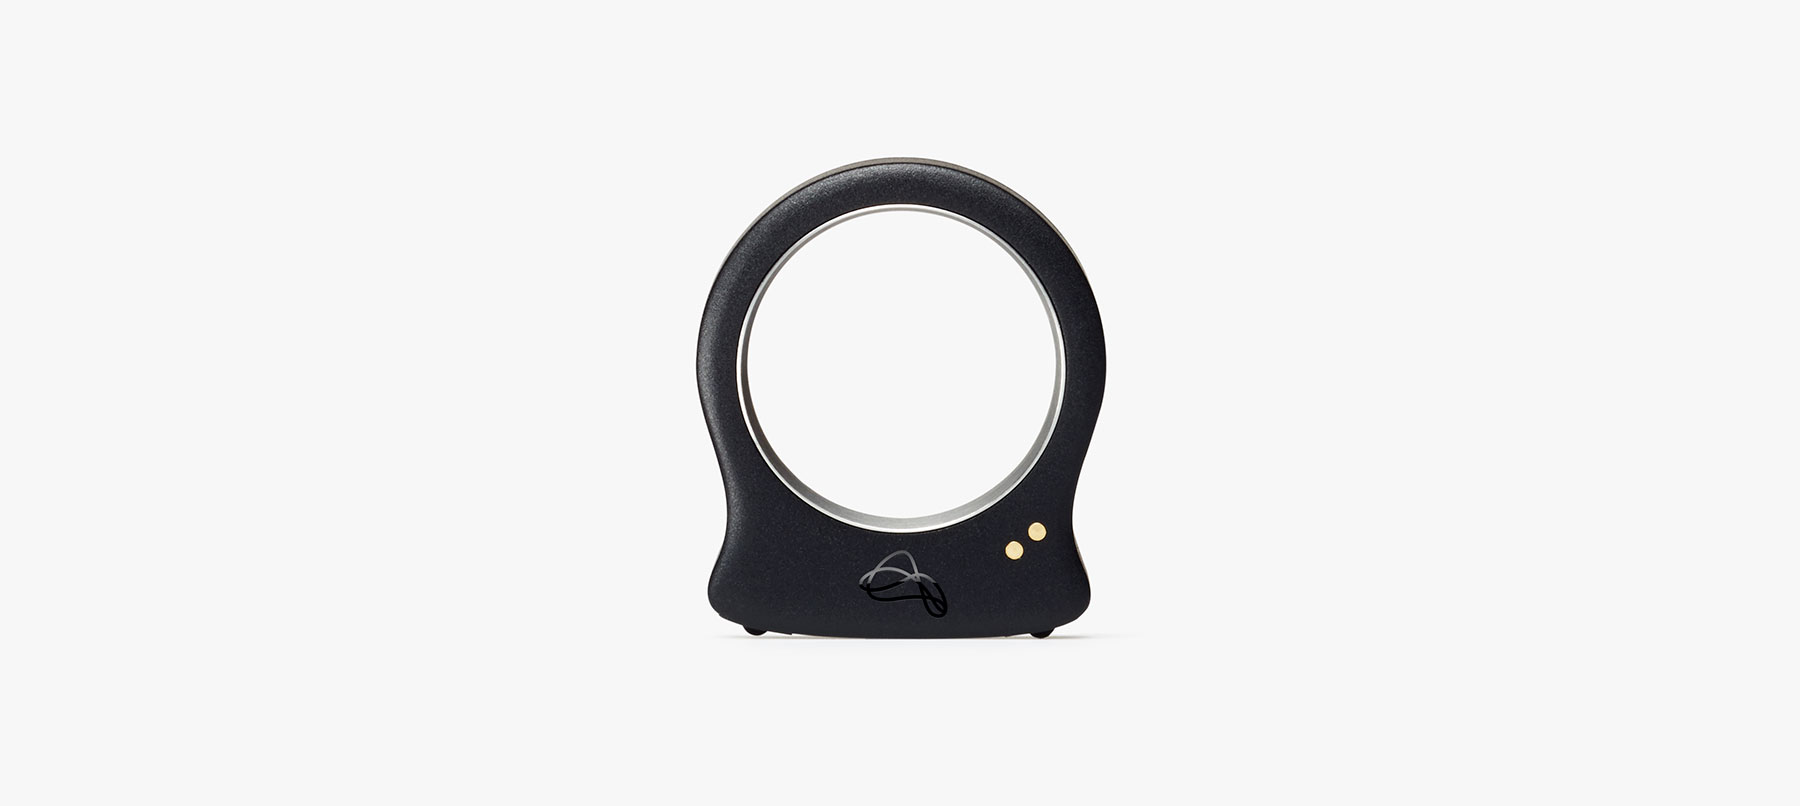 Nod ring controls devices with gestures